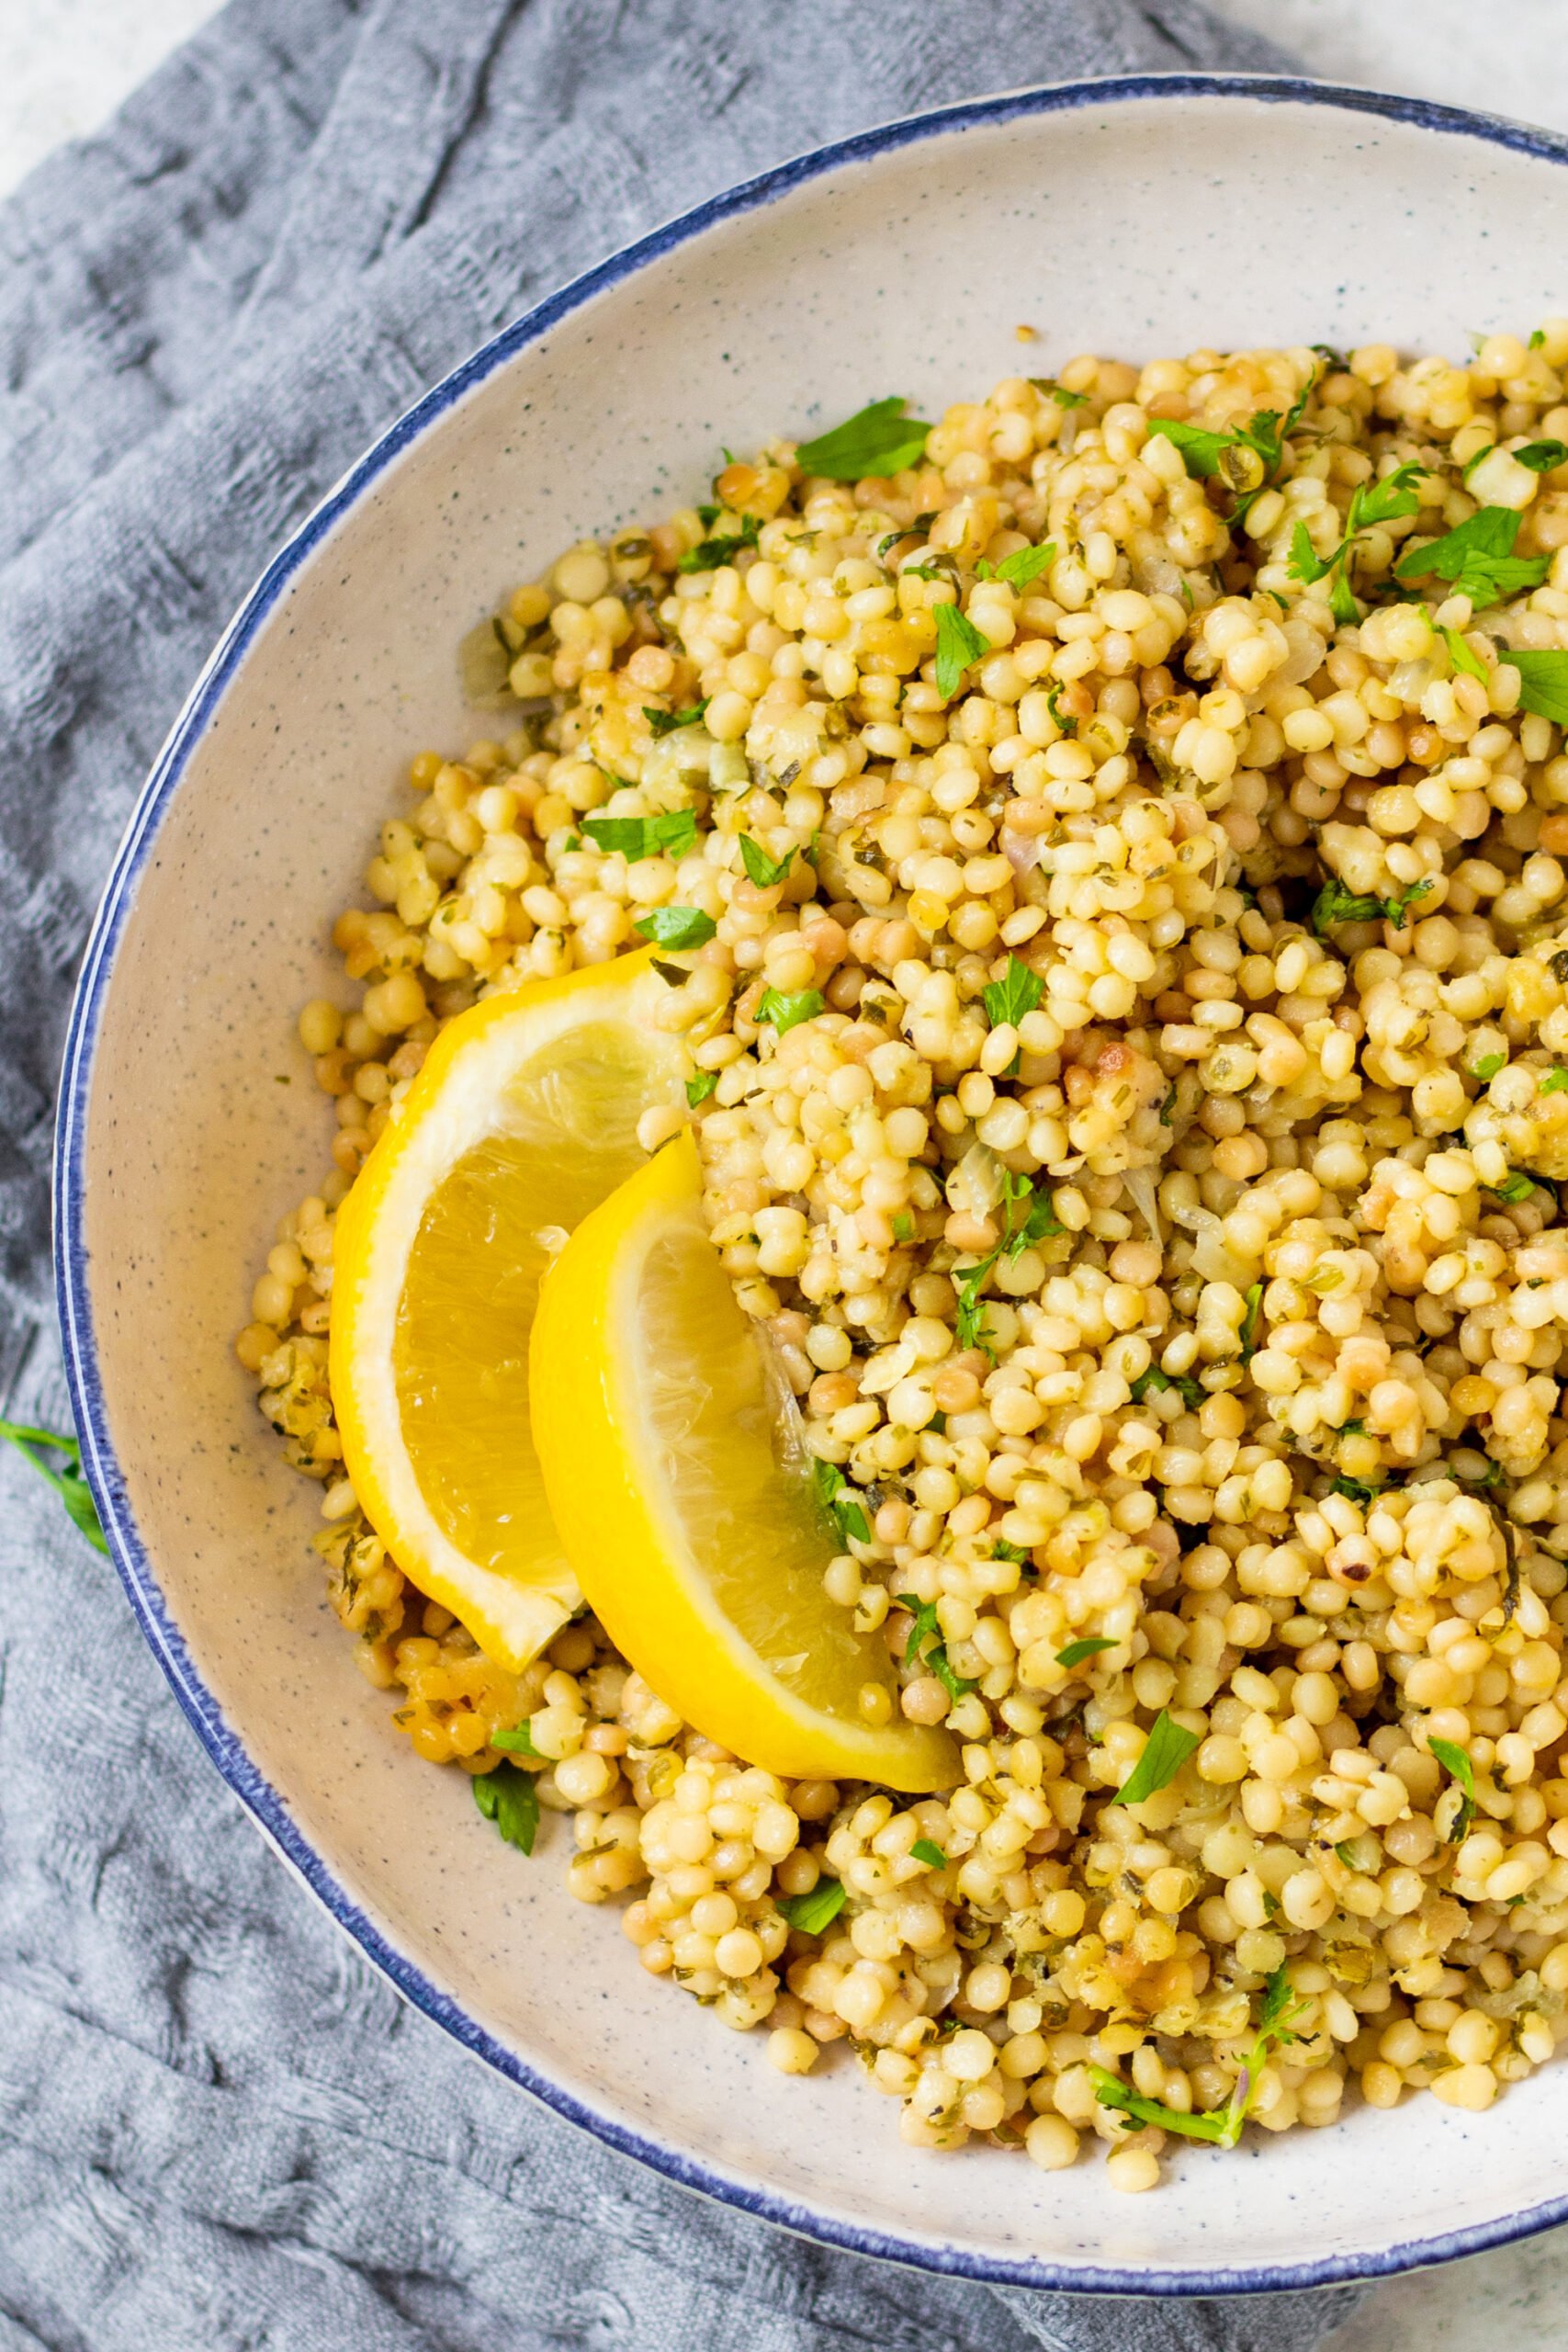 Instant Pot couscous is the best choice for getting an easy side onto your table. This recipe is both dairy free and vegan and is ready in about 15 minutes so it's super quick. Use this recipe as a standalone side for dinner or in any scenario where you'd want a bed of pasta to top with your favorite sauce, salad or recipe. #couscous #pressurecookerrecipes #veganrecipes #dairyfreerecipes #healthypastarecipes #healthyrecipes